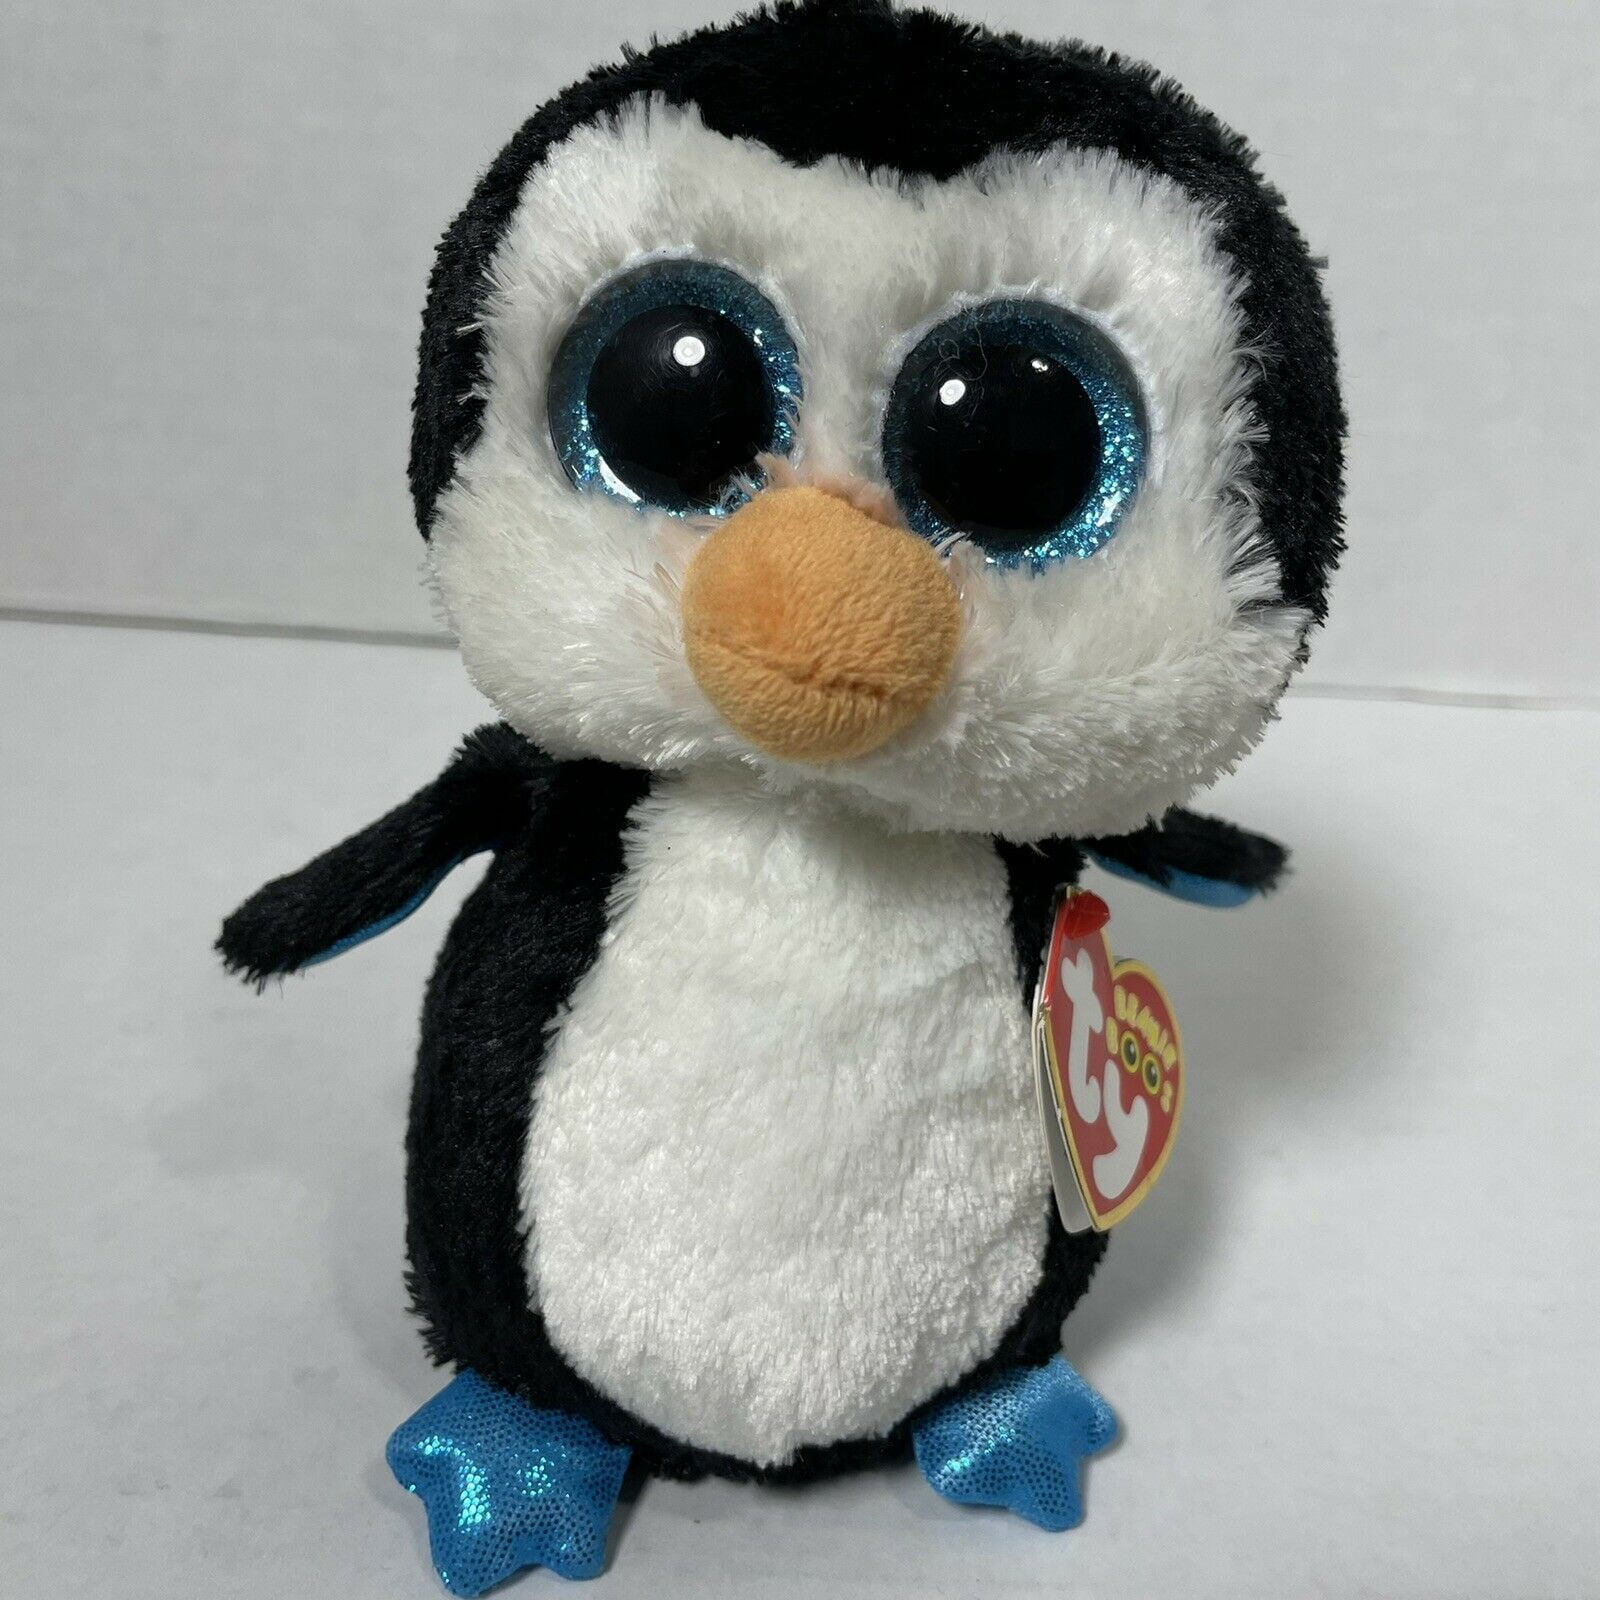 Ty Beanie Boos Waddles Penguin 16" Plush Large Ty36803 for sale online 